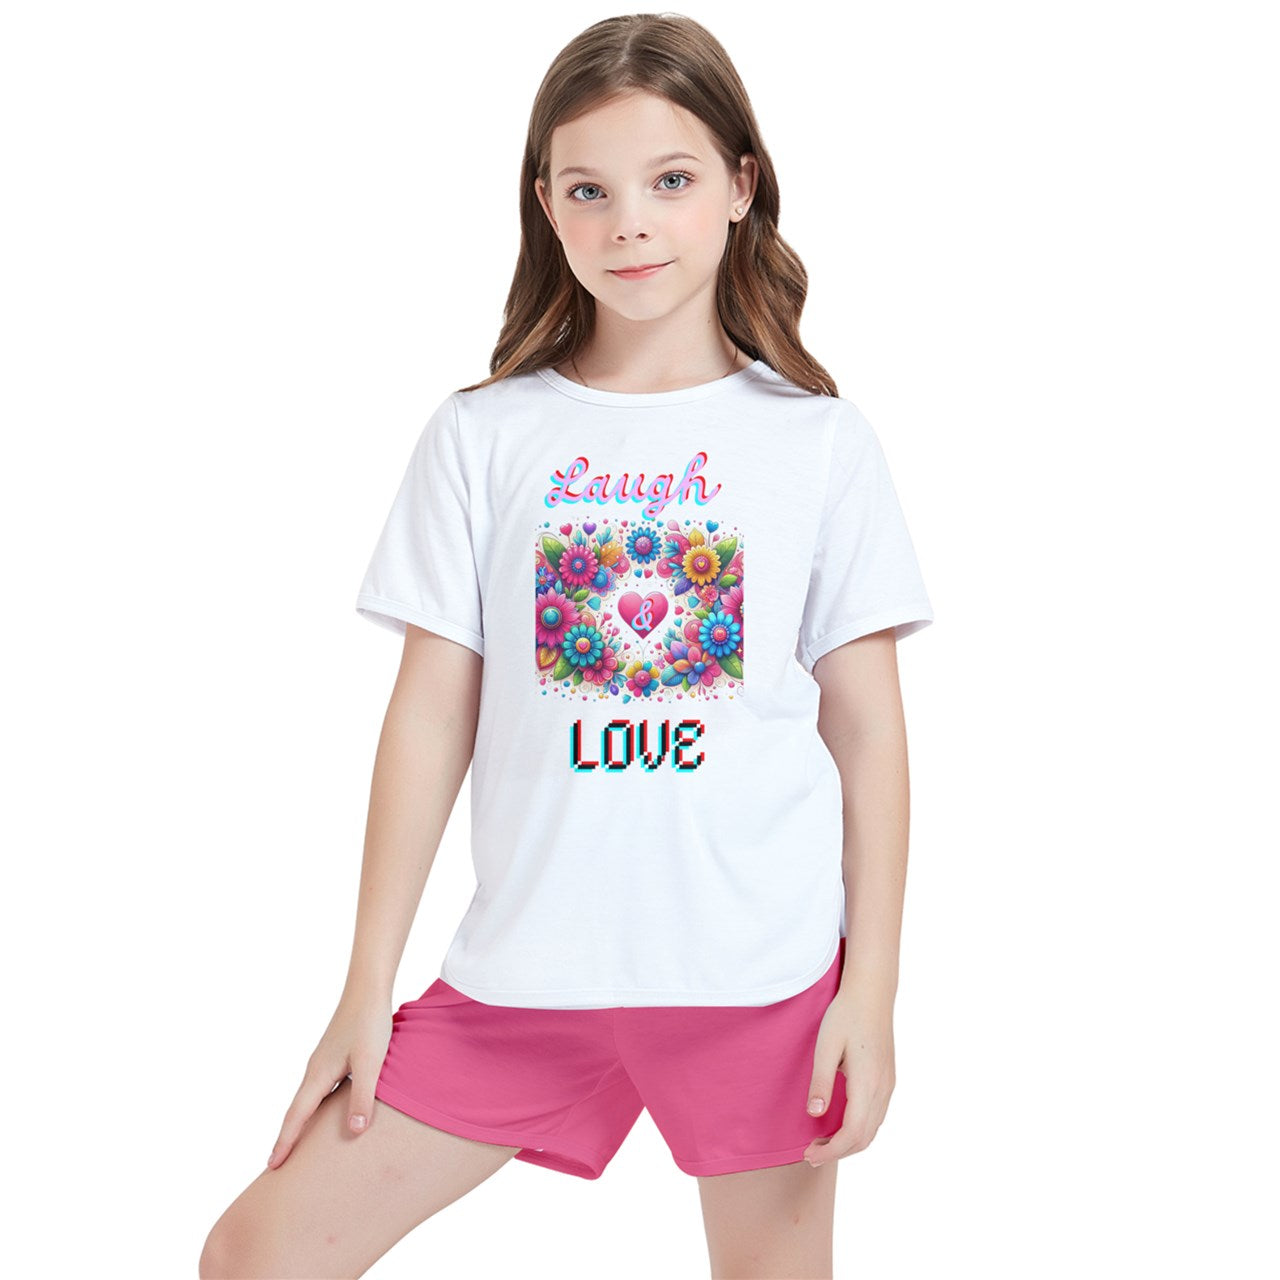 Laugh Love - Laugh Love Kids' T-Shirt And Sports Shorts Outfit Set - girls short set at TFC&H Co.